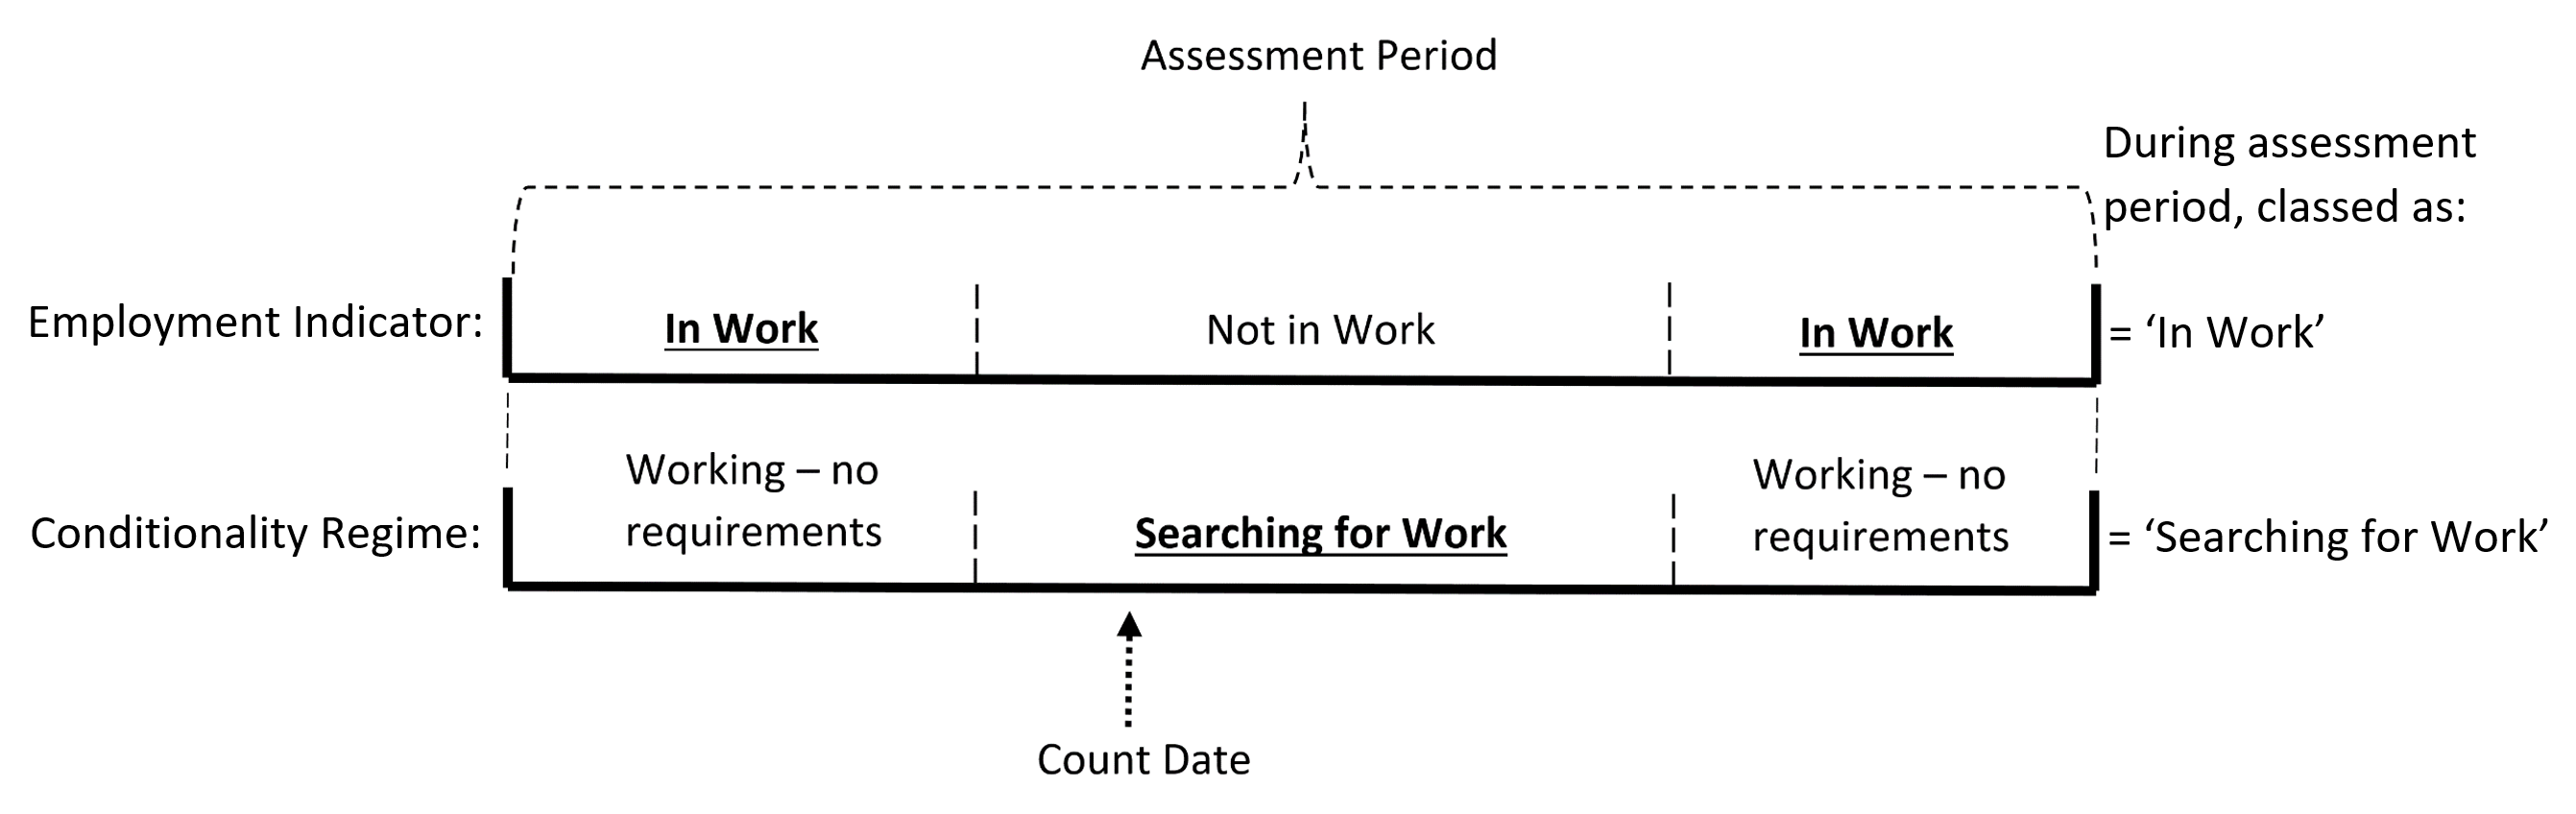 A diagram of the conditionality regime and employment indicator